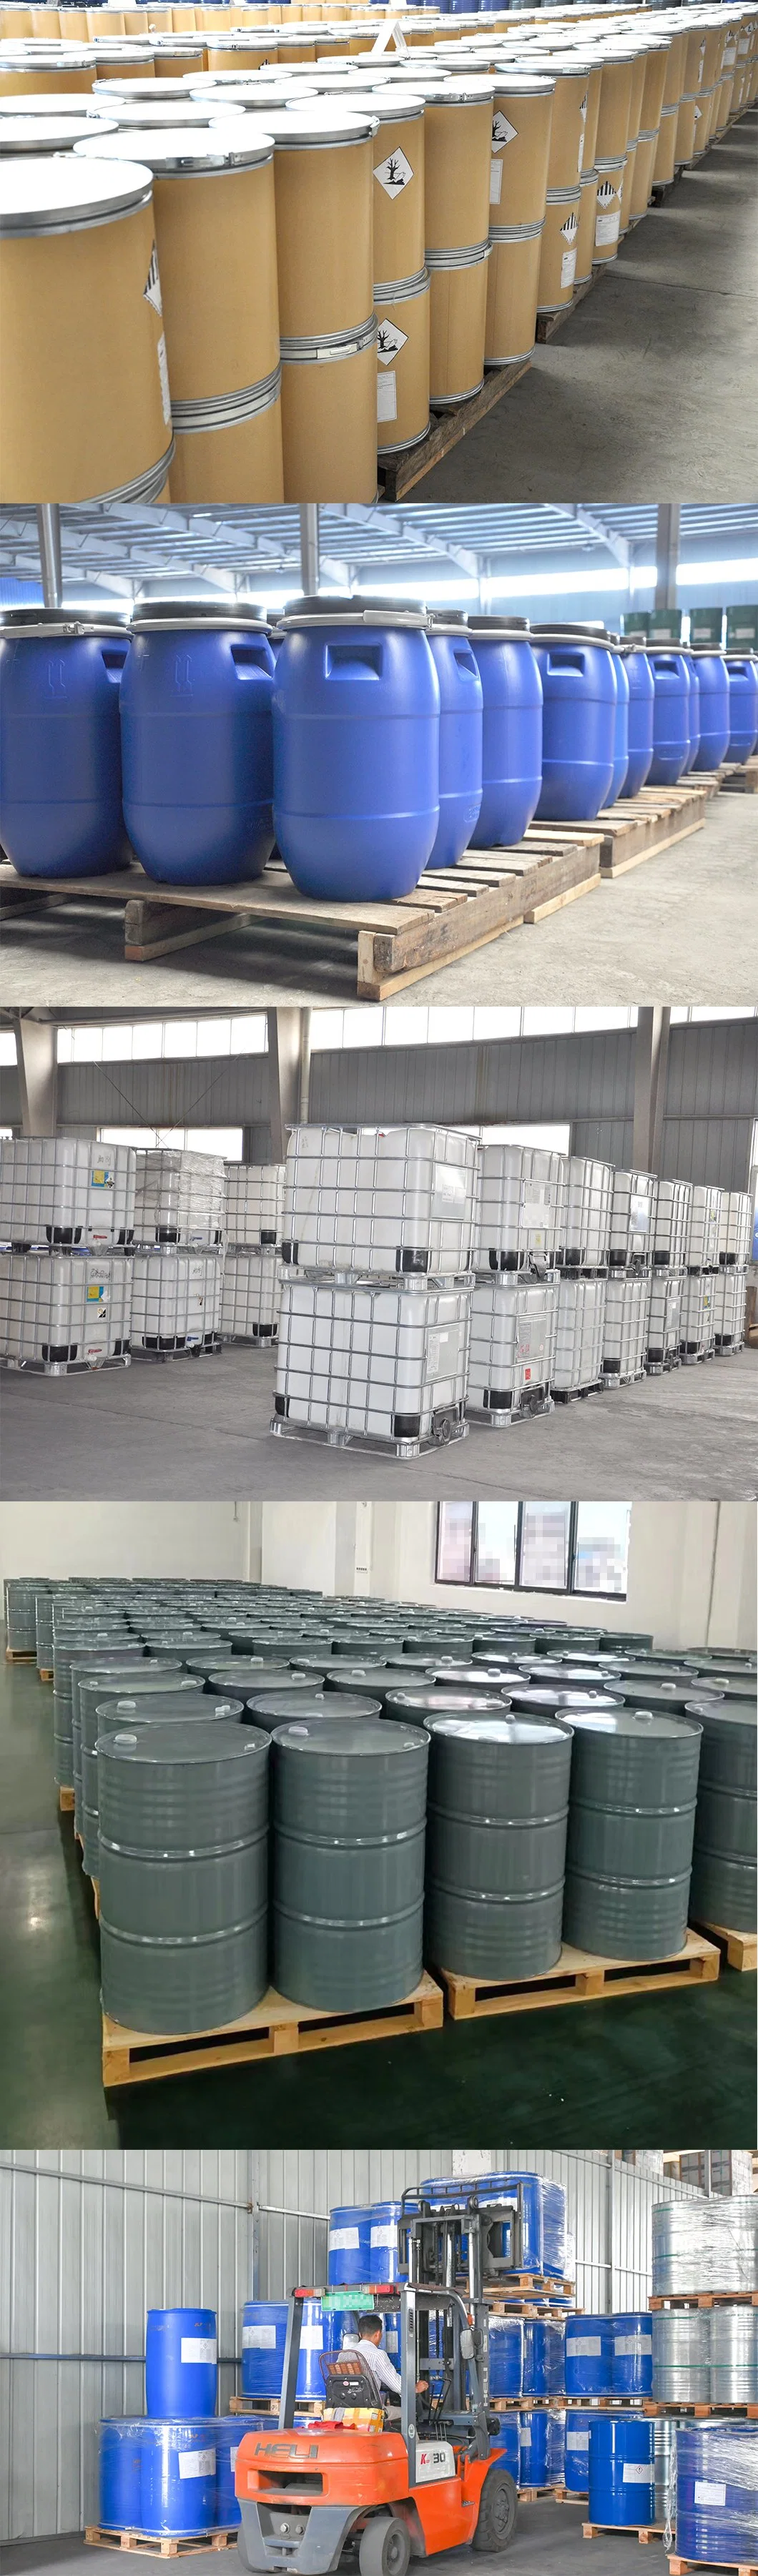 China Factory Supply Delta-Dodecalactone with Good Quality CAS: 713-95-1